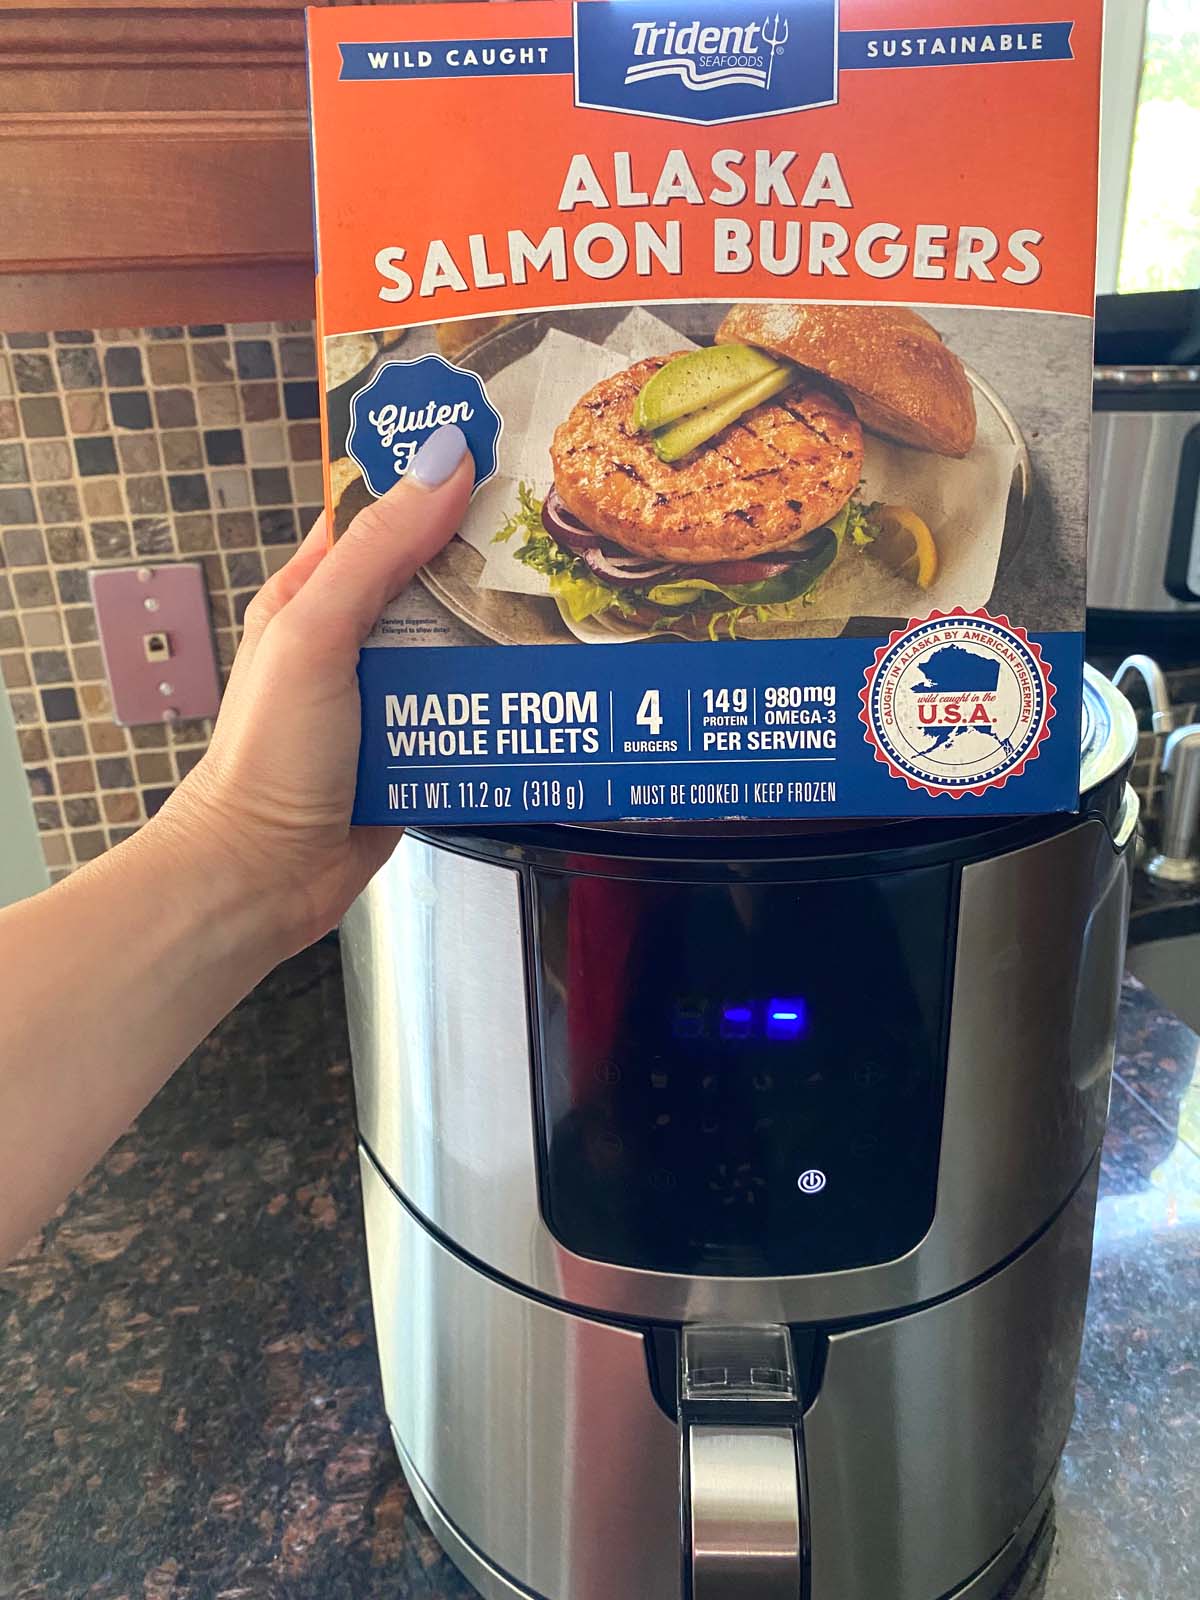 Box of frozen salmon burgers held in front an air fryer.